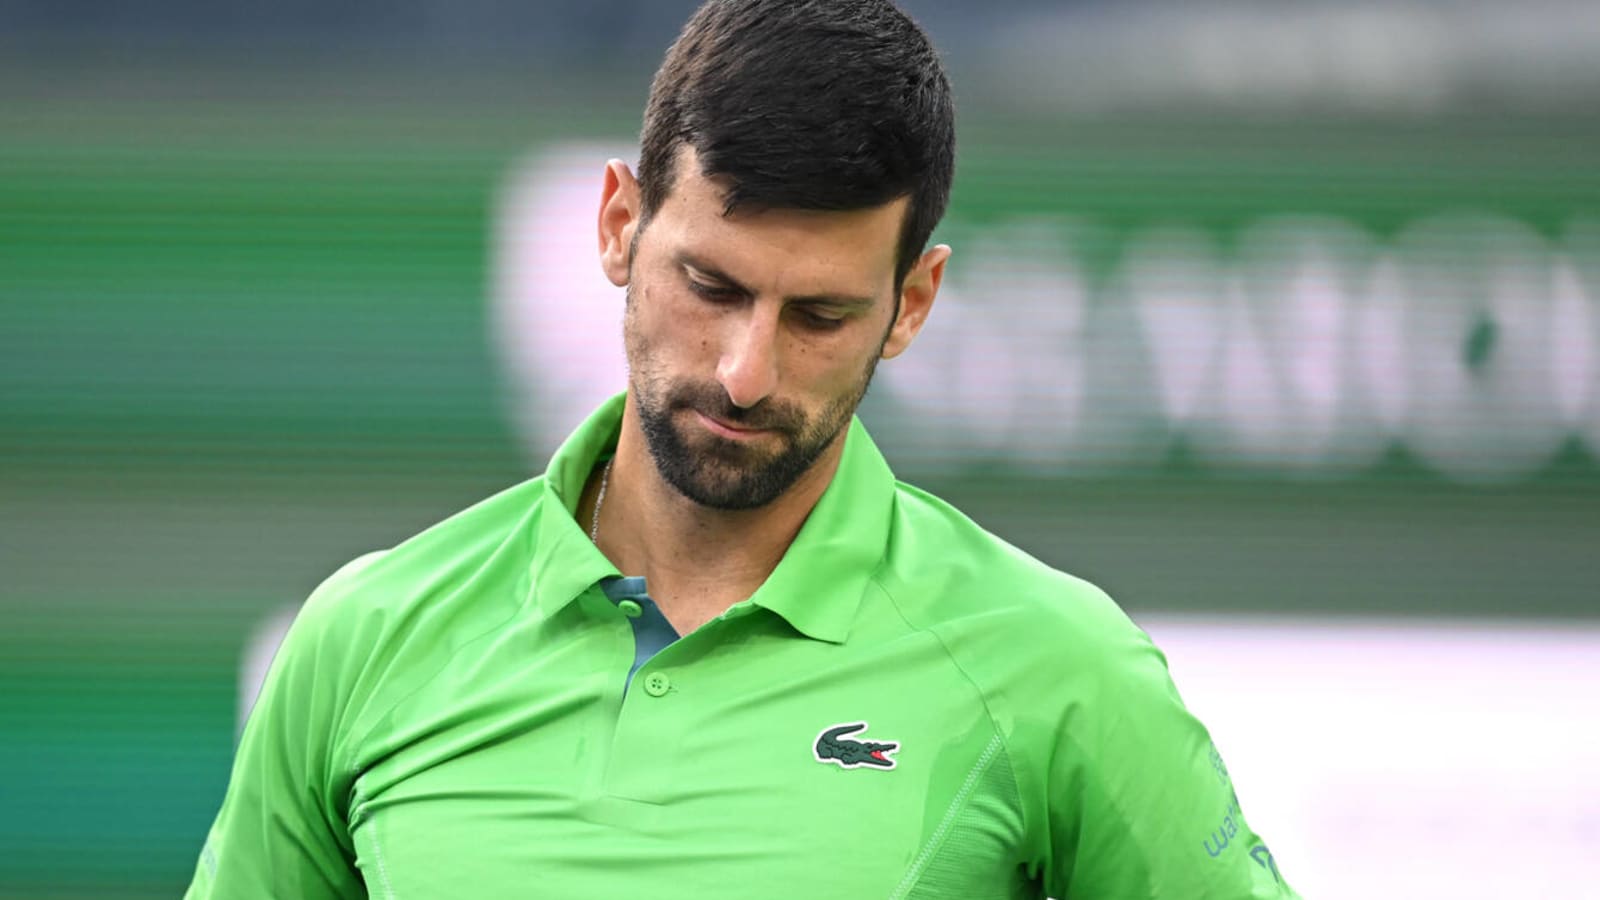 Djokovic says bottle incident may have played role in loss